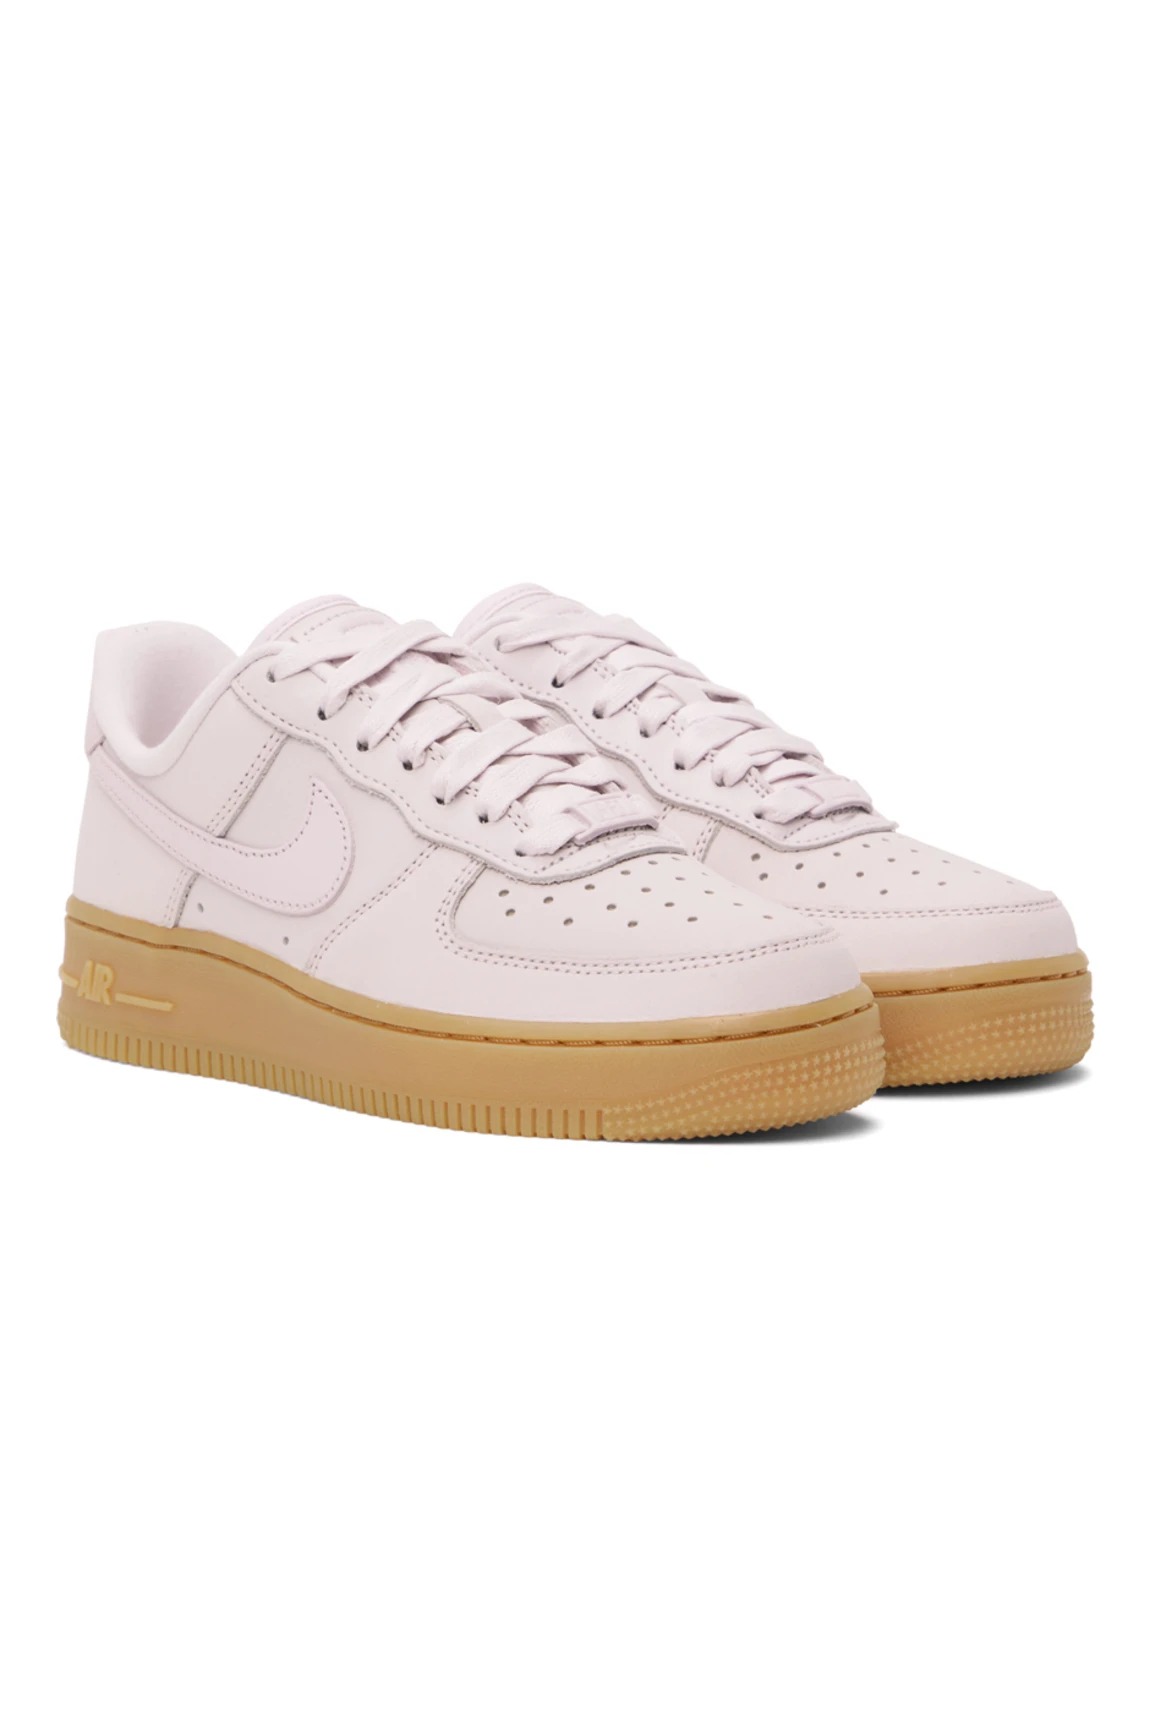 Pink Perfection: The New Nike Air Force 1's with Gum Sole on SSENSE